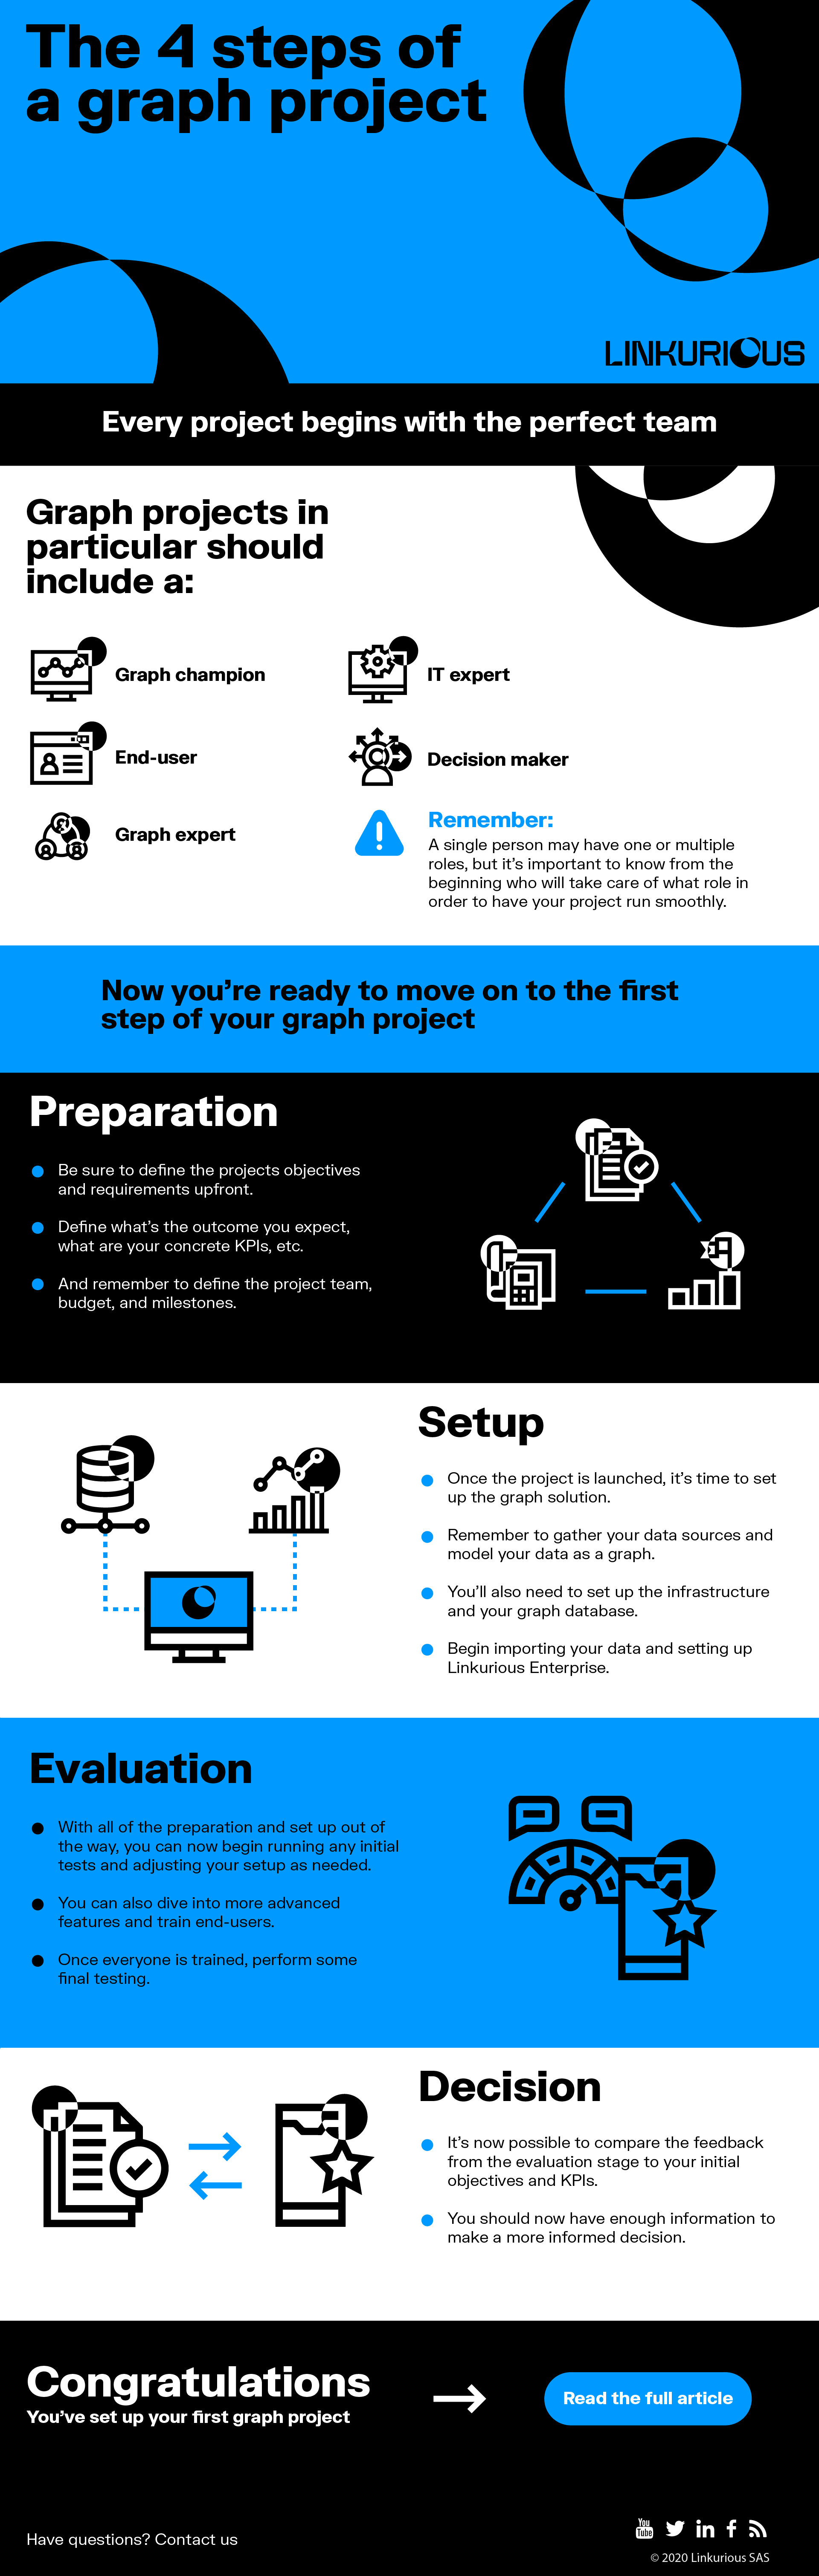 New Linkurious Infographic_4 Steps of a Graph Project